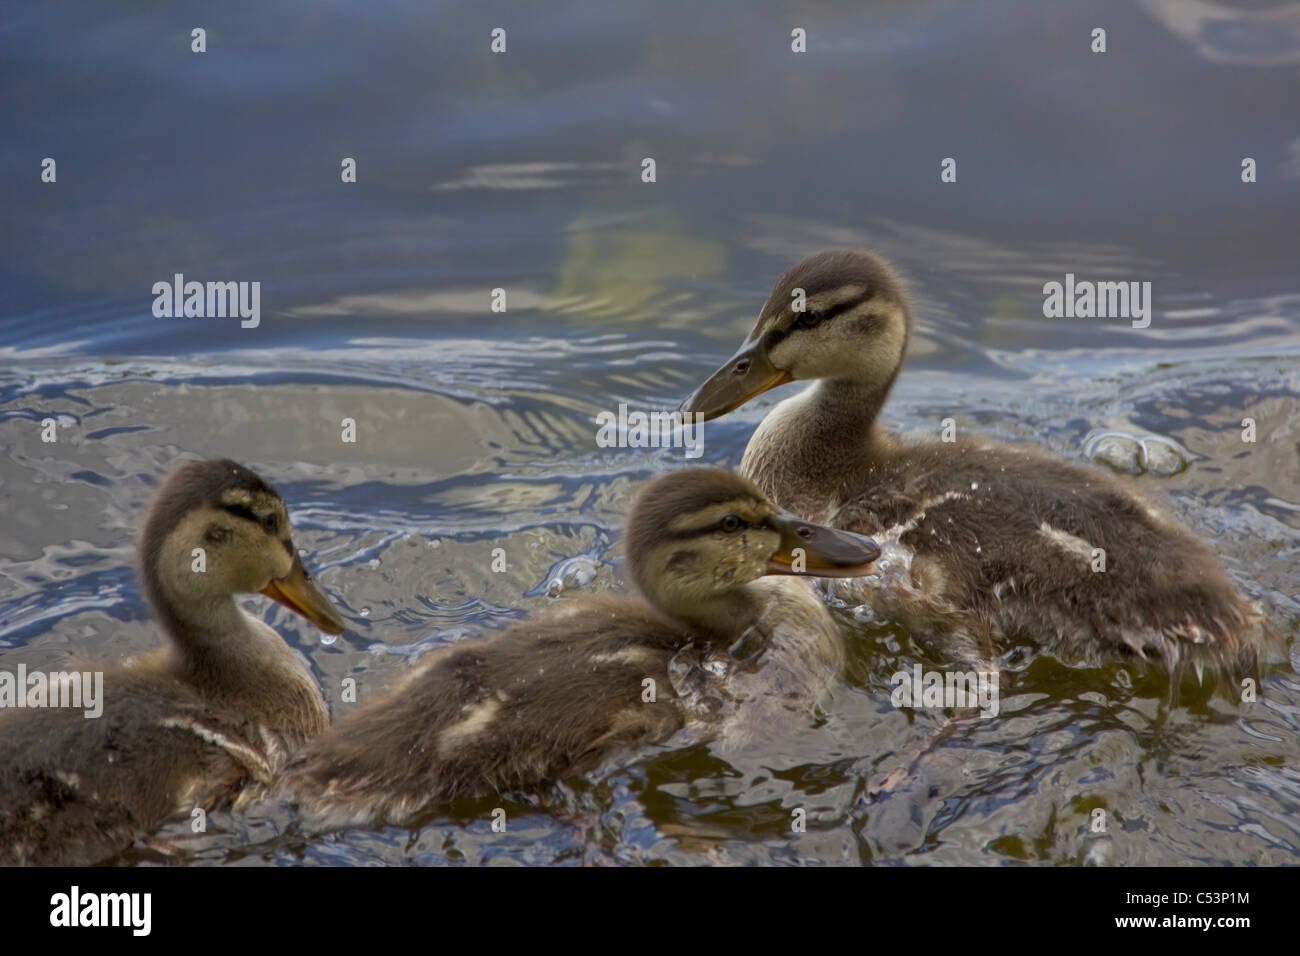 close-up view of three little ducklings playing in water Stock Photo